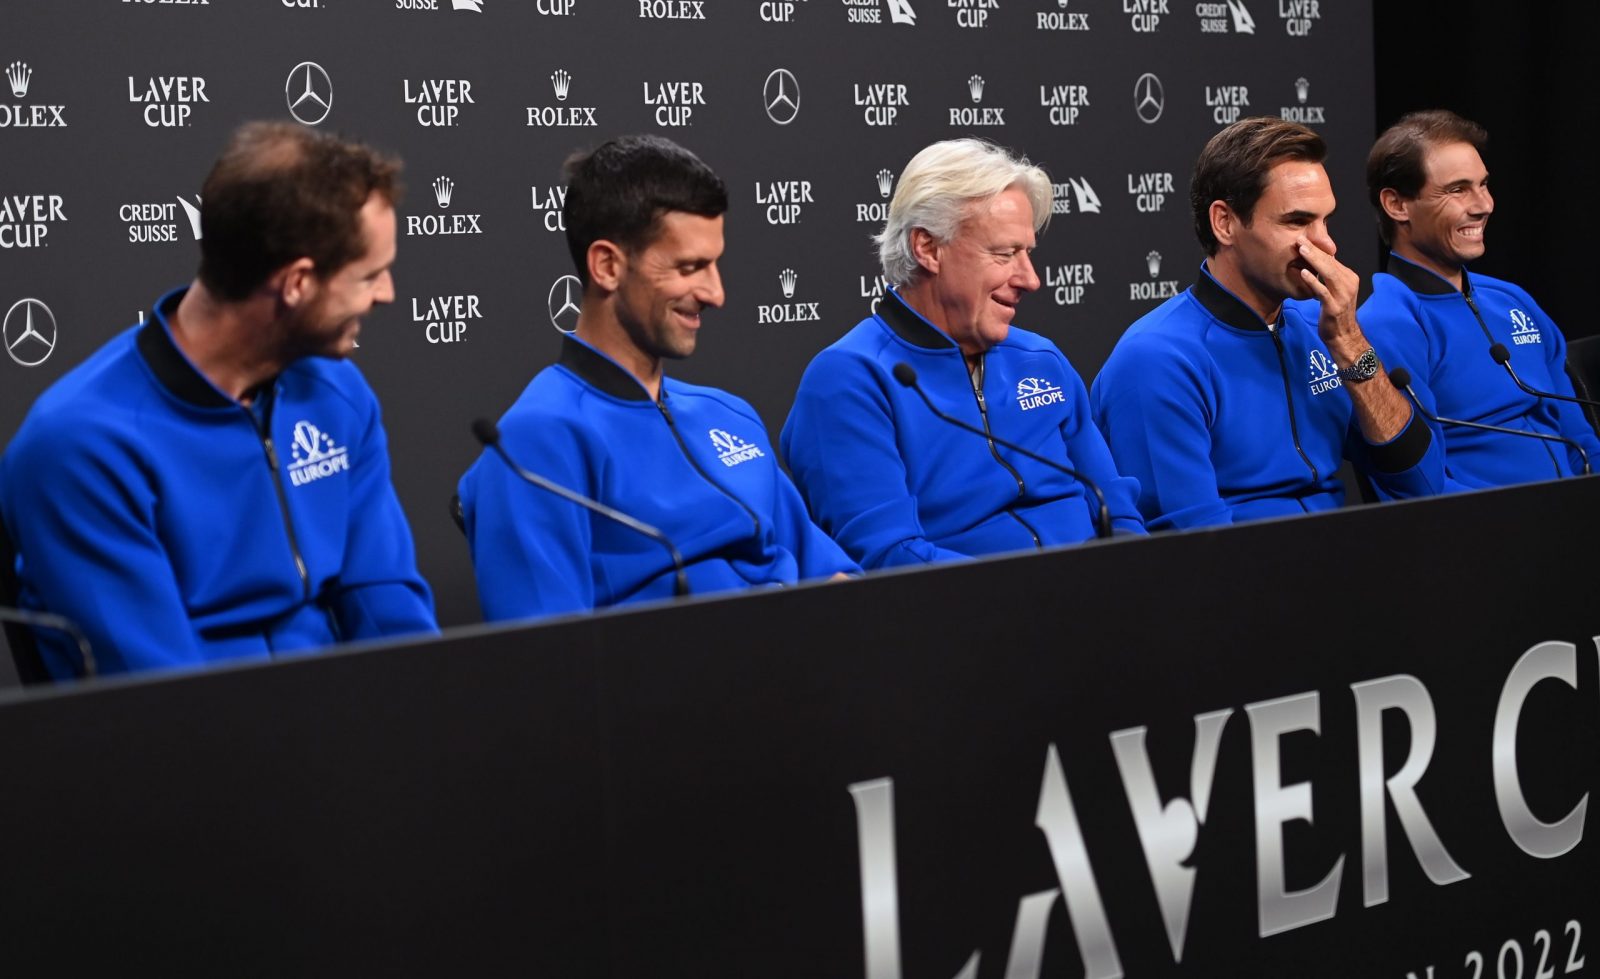 epa10198953 From L: British player Andy Murray, Serbian player Novak Djokovic, former World No.1 and captain of Team Europe Bjoern Borg of Sweden, Swiss player Roger Federer and Spanish player Rafael Nadal during a press conference in London, Britain, 22 September 2022, ahead of the Laver Cup tennis tournament starting on 23 September.  EPA/ANDY RAIN